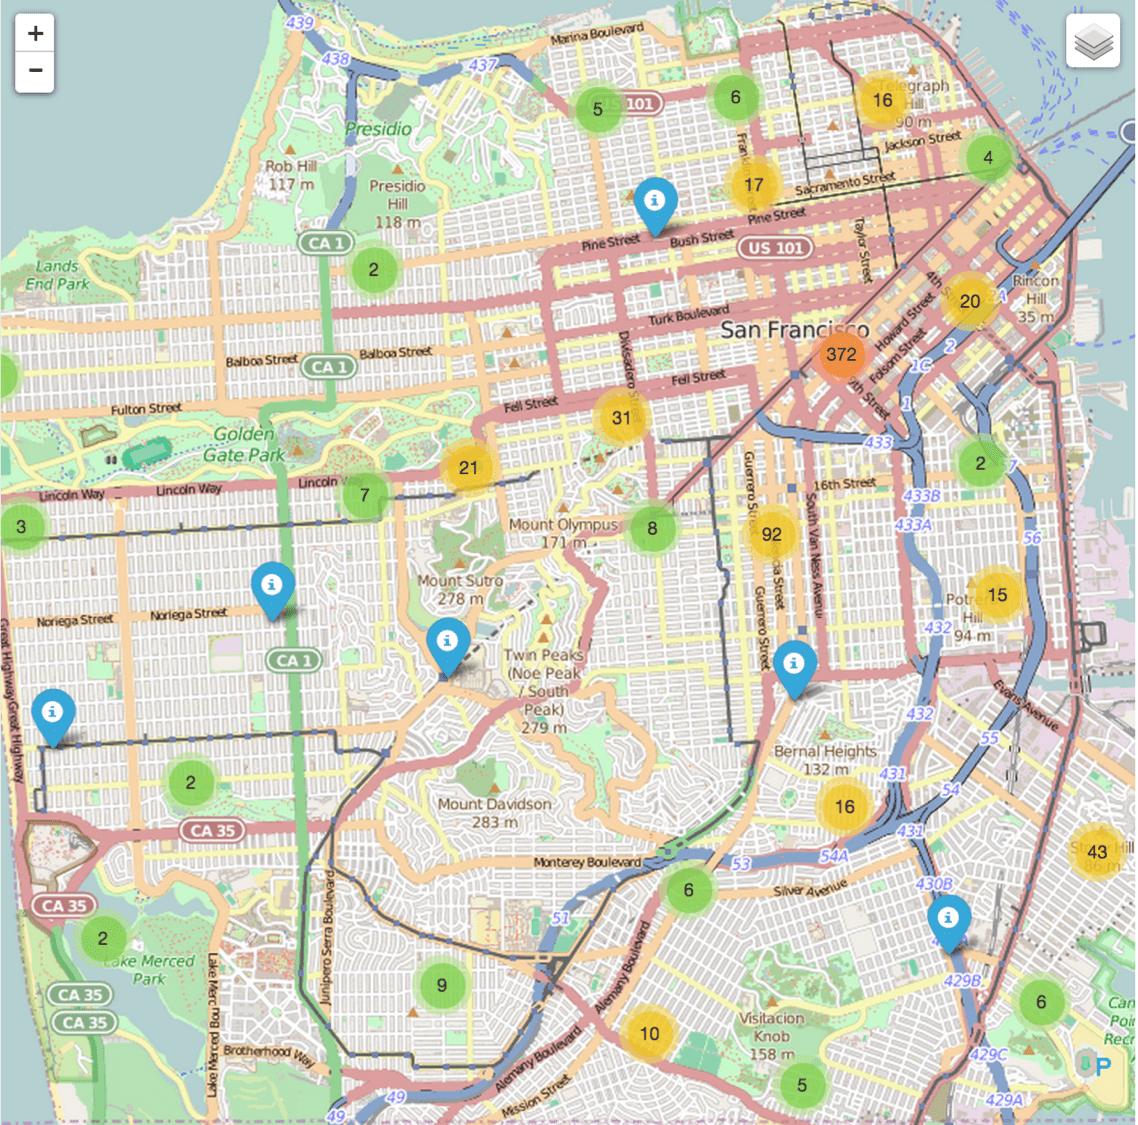 San Francisco map with crime incident clusters in choropleth